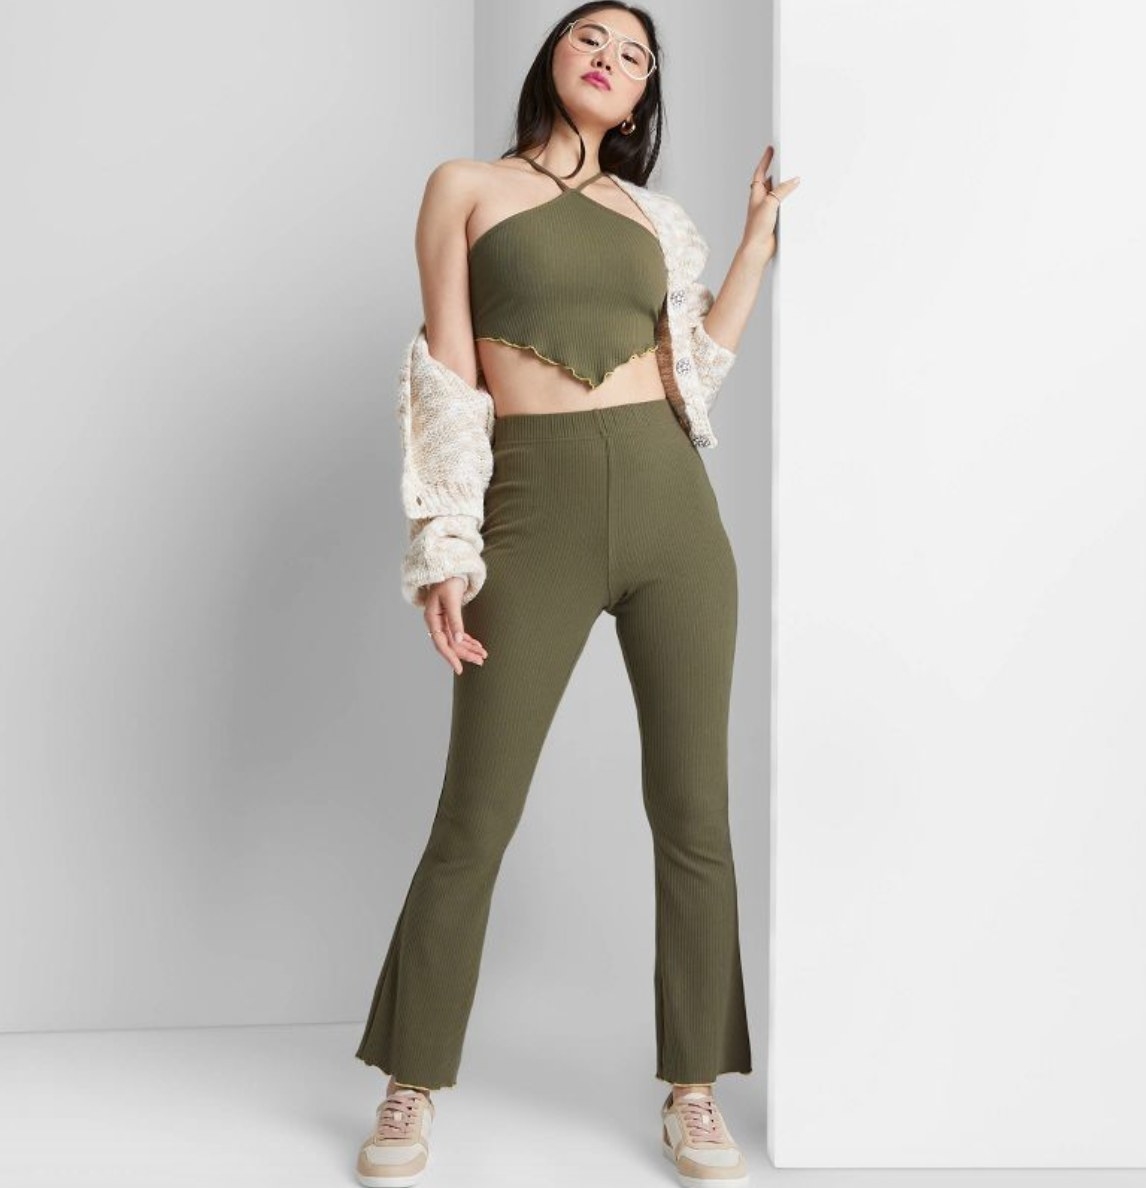 a model wearing the pants and matching top in green